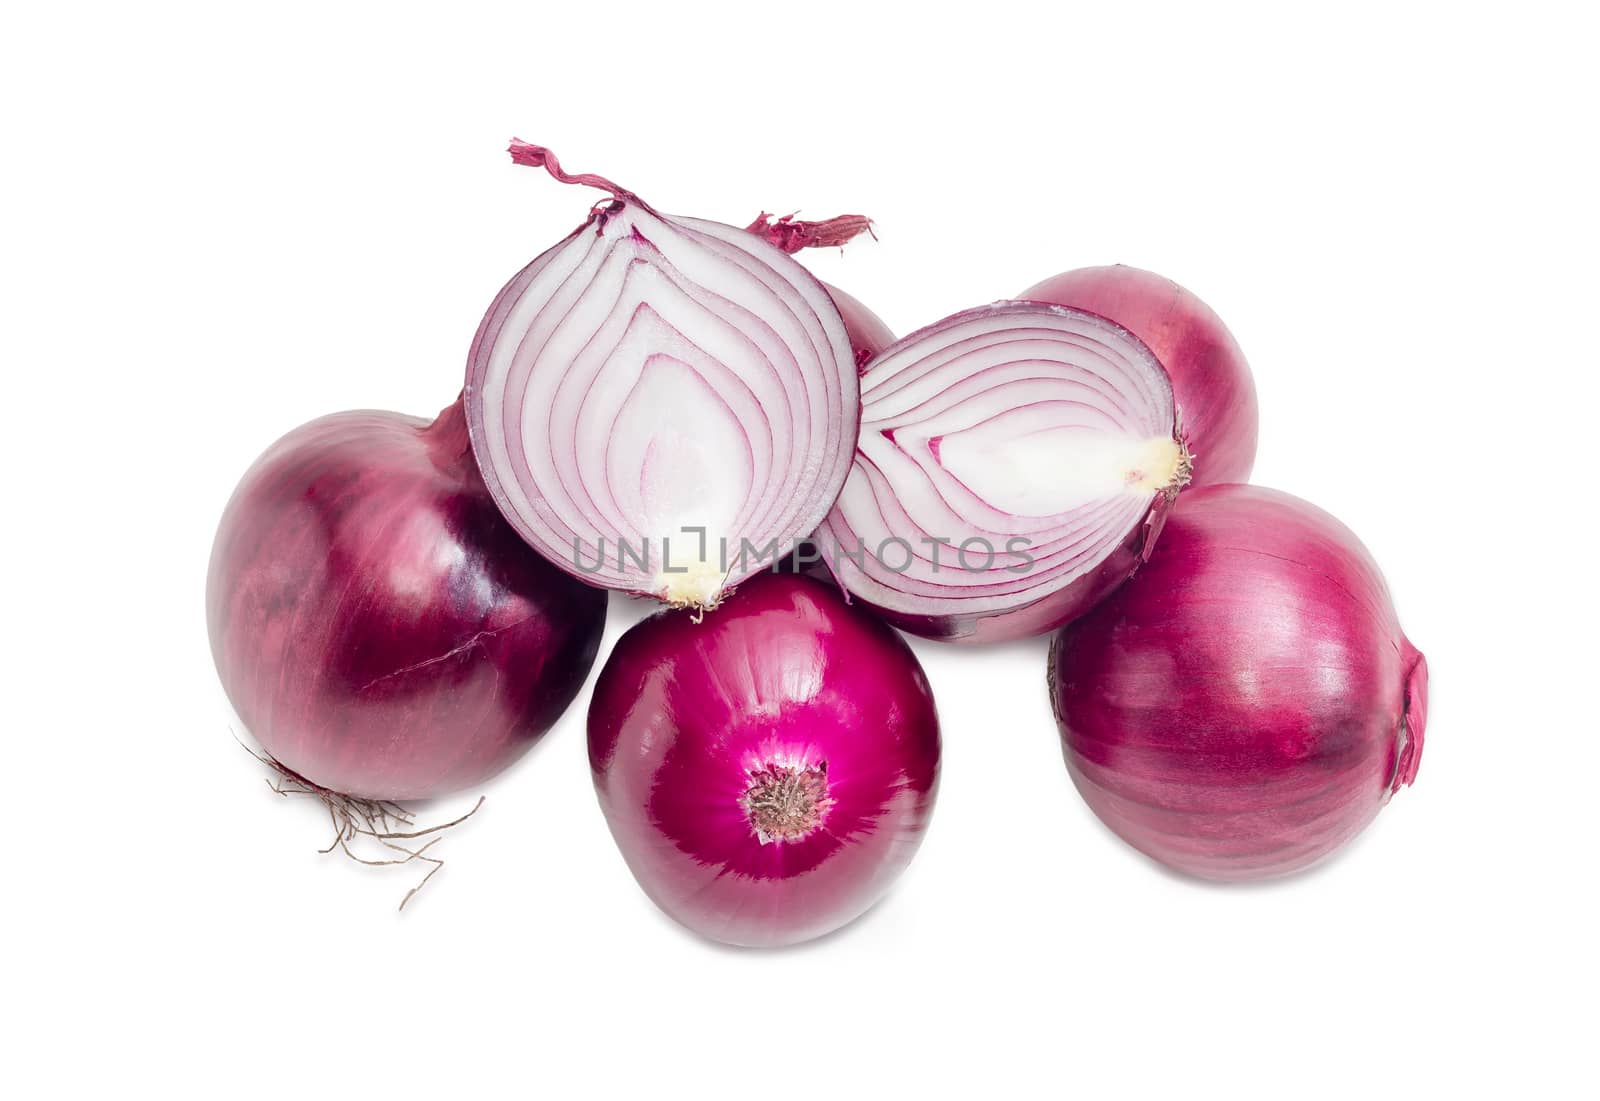 Several whole and one cut in half red onions on a white background
